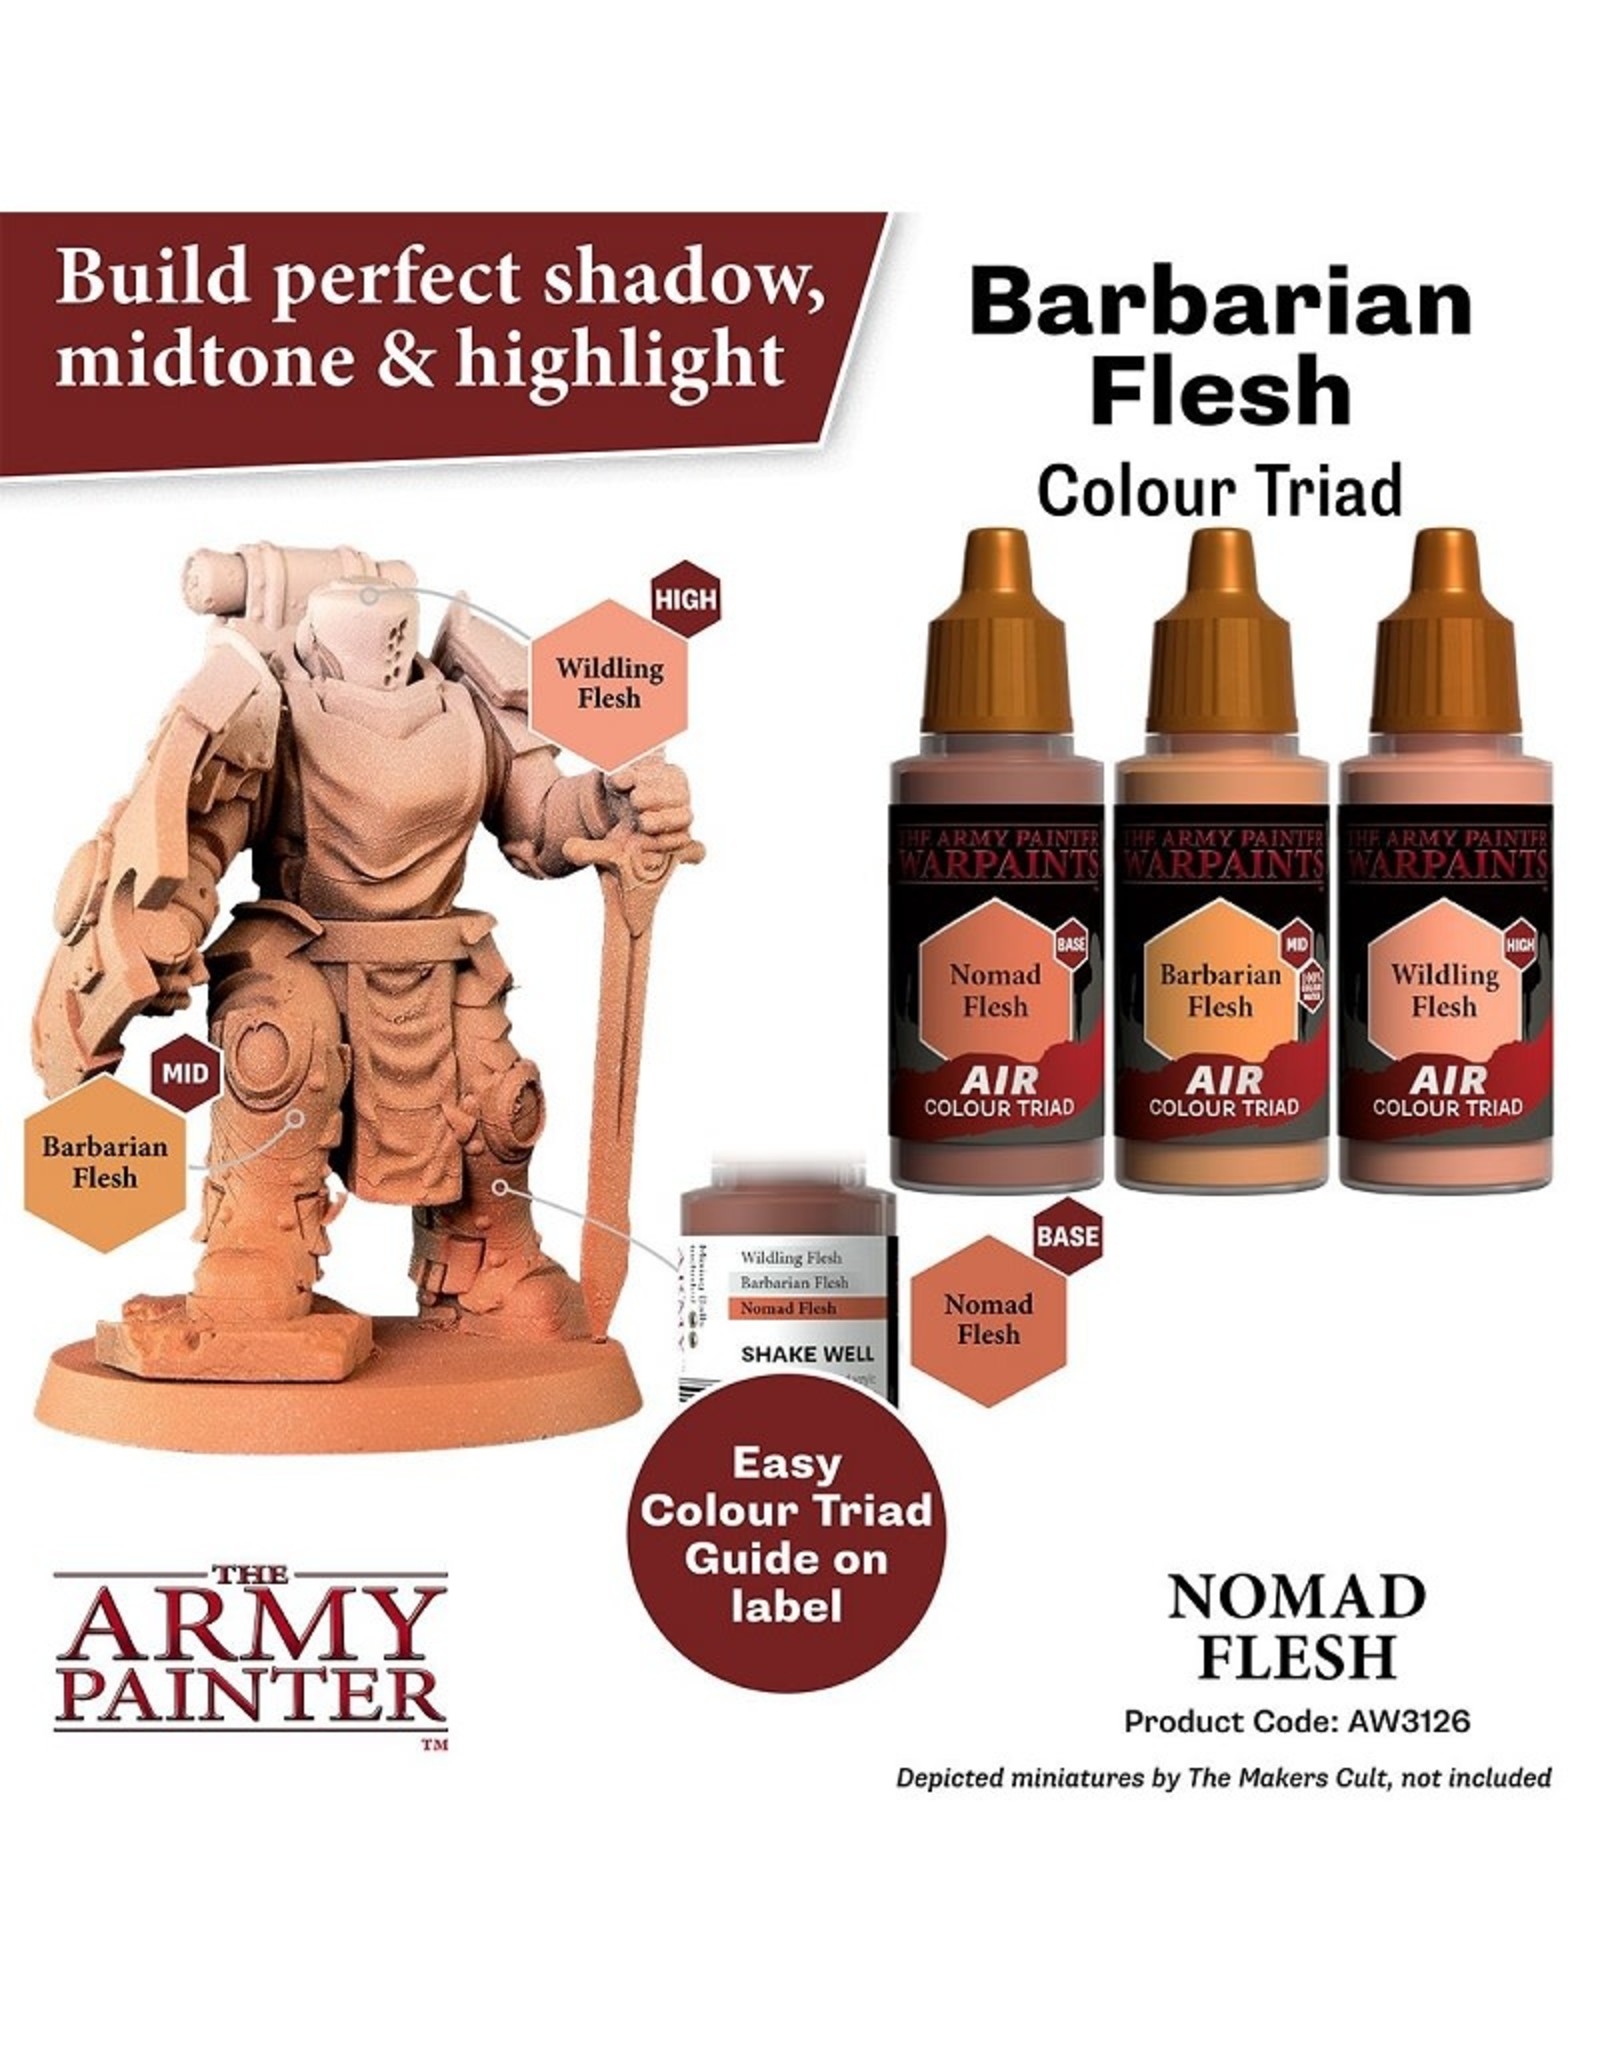 The Army Painter Warpaint Air: Nomad Flesh (18ml)